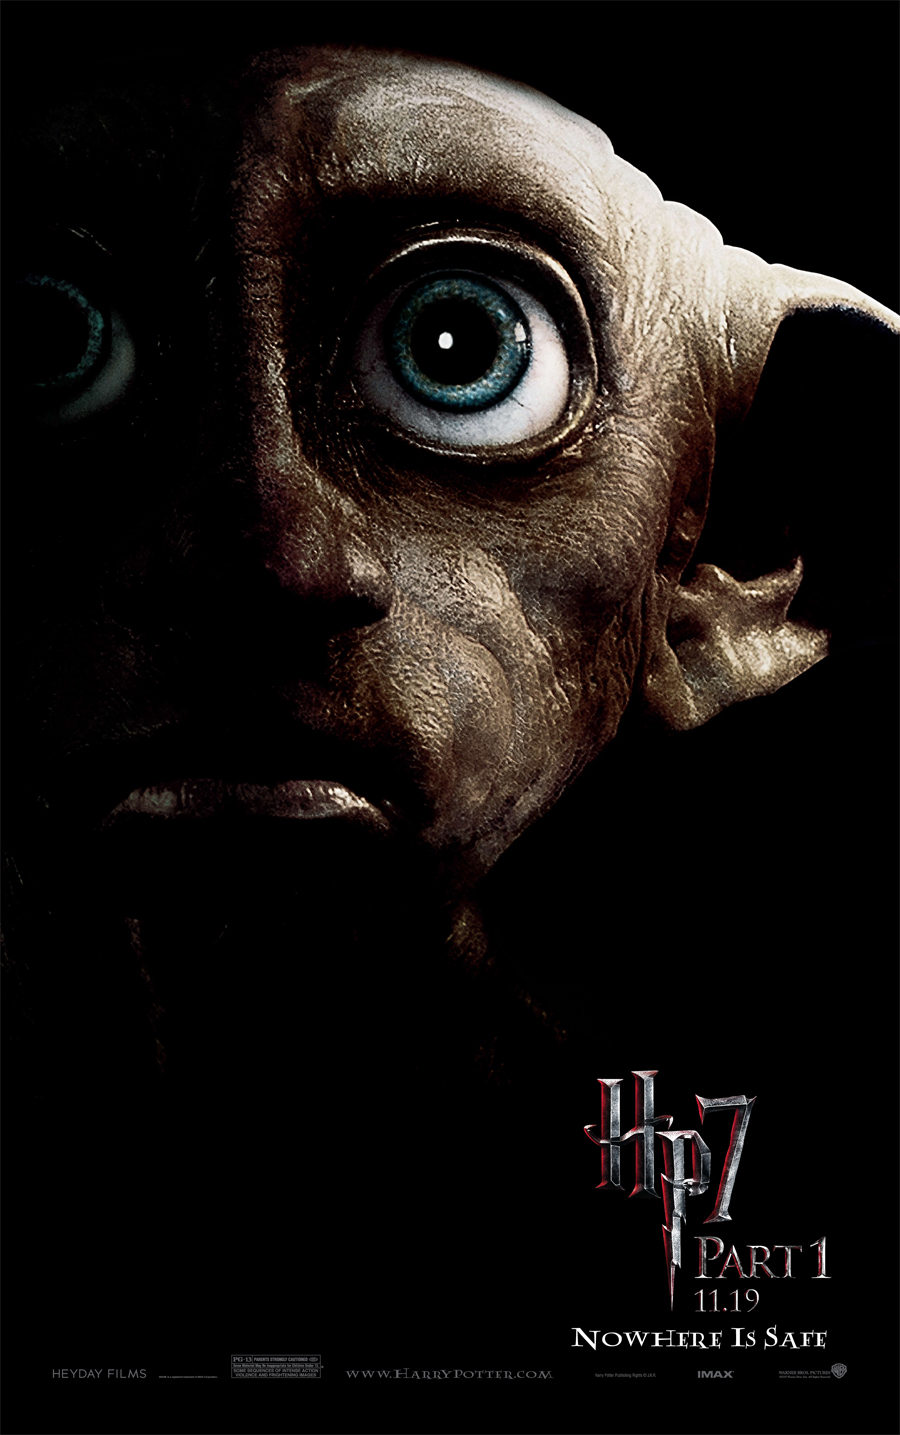  house elf from Harry Potter and the Deathly Hallows picture wallpaper